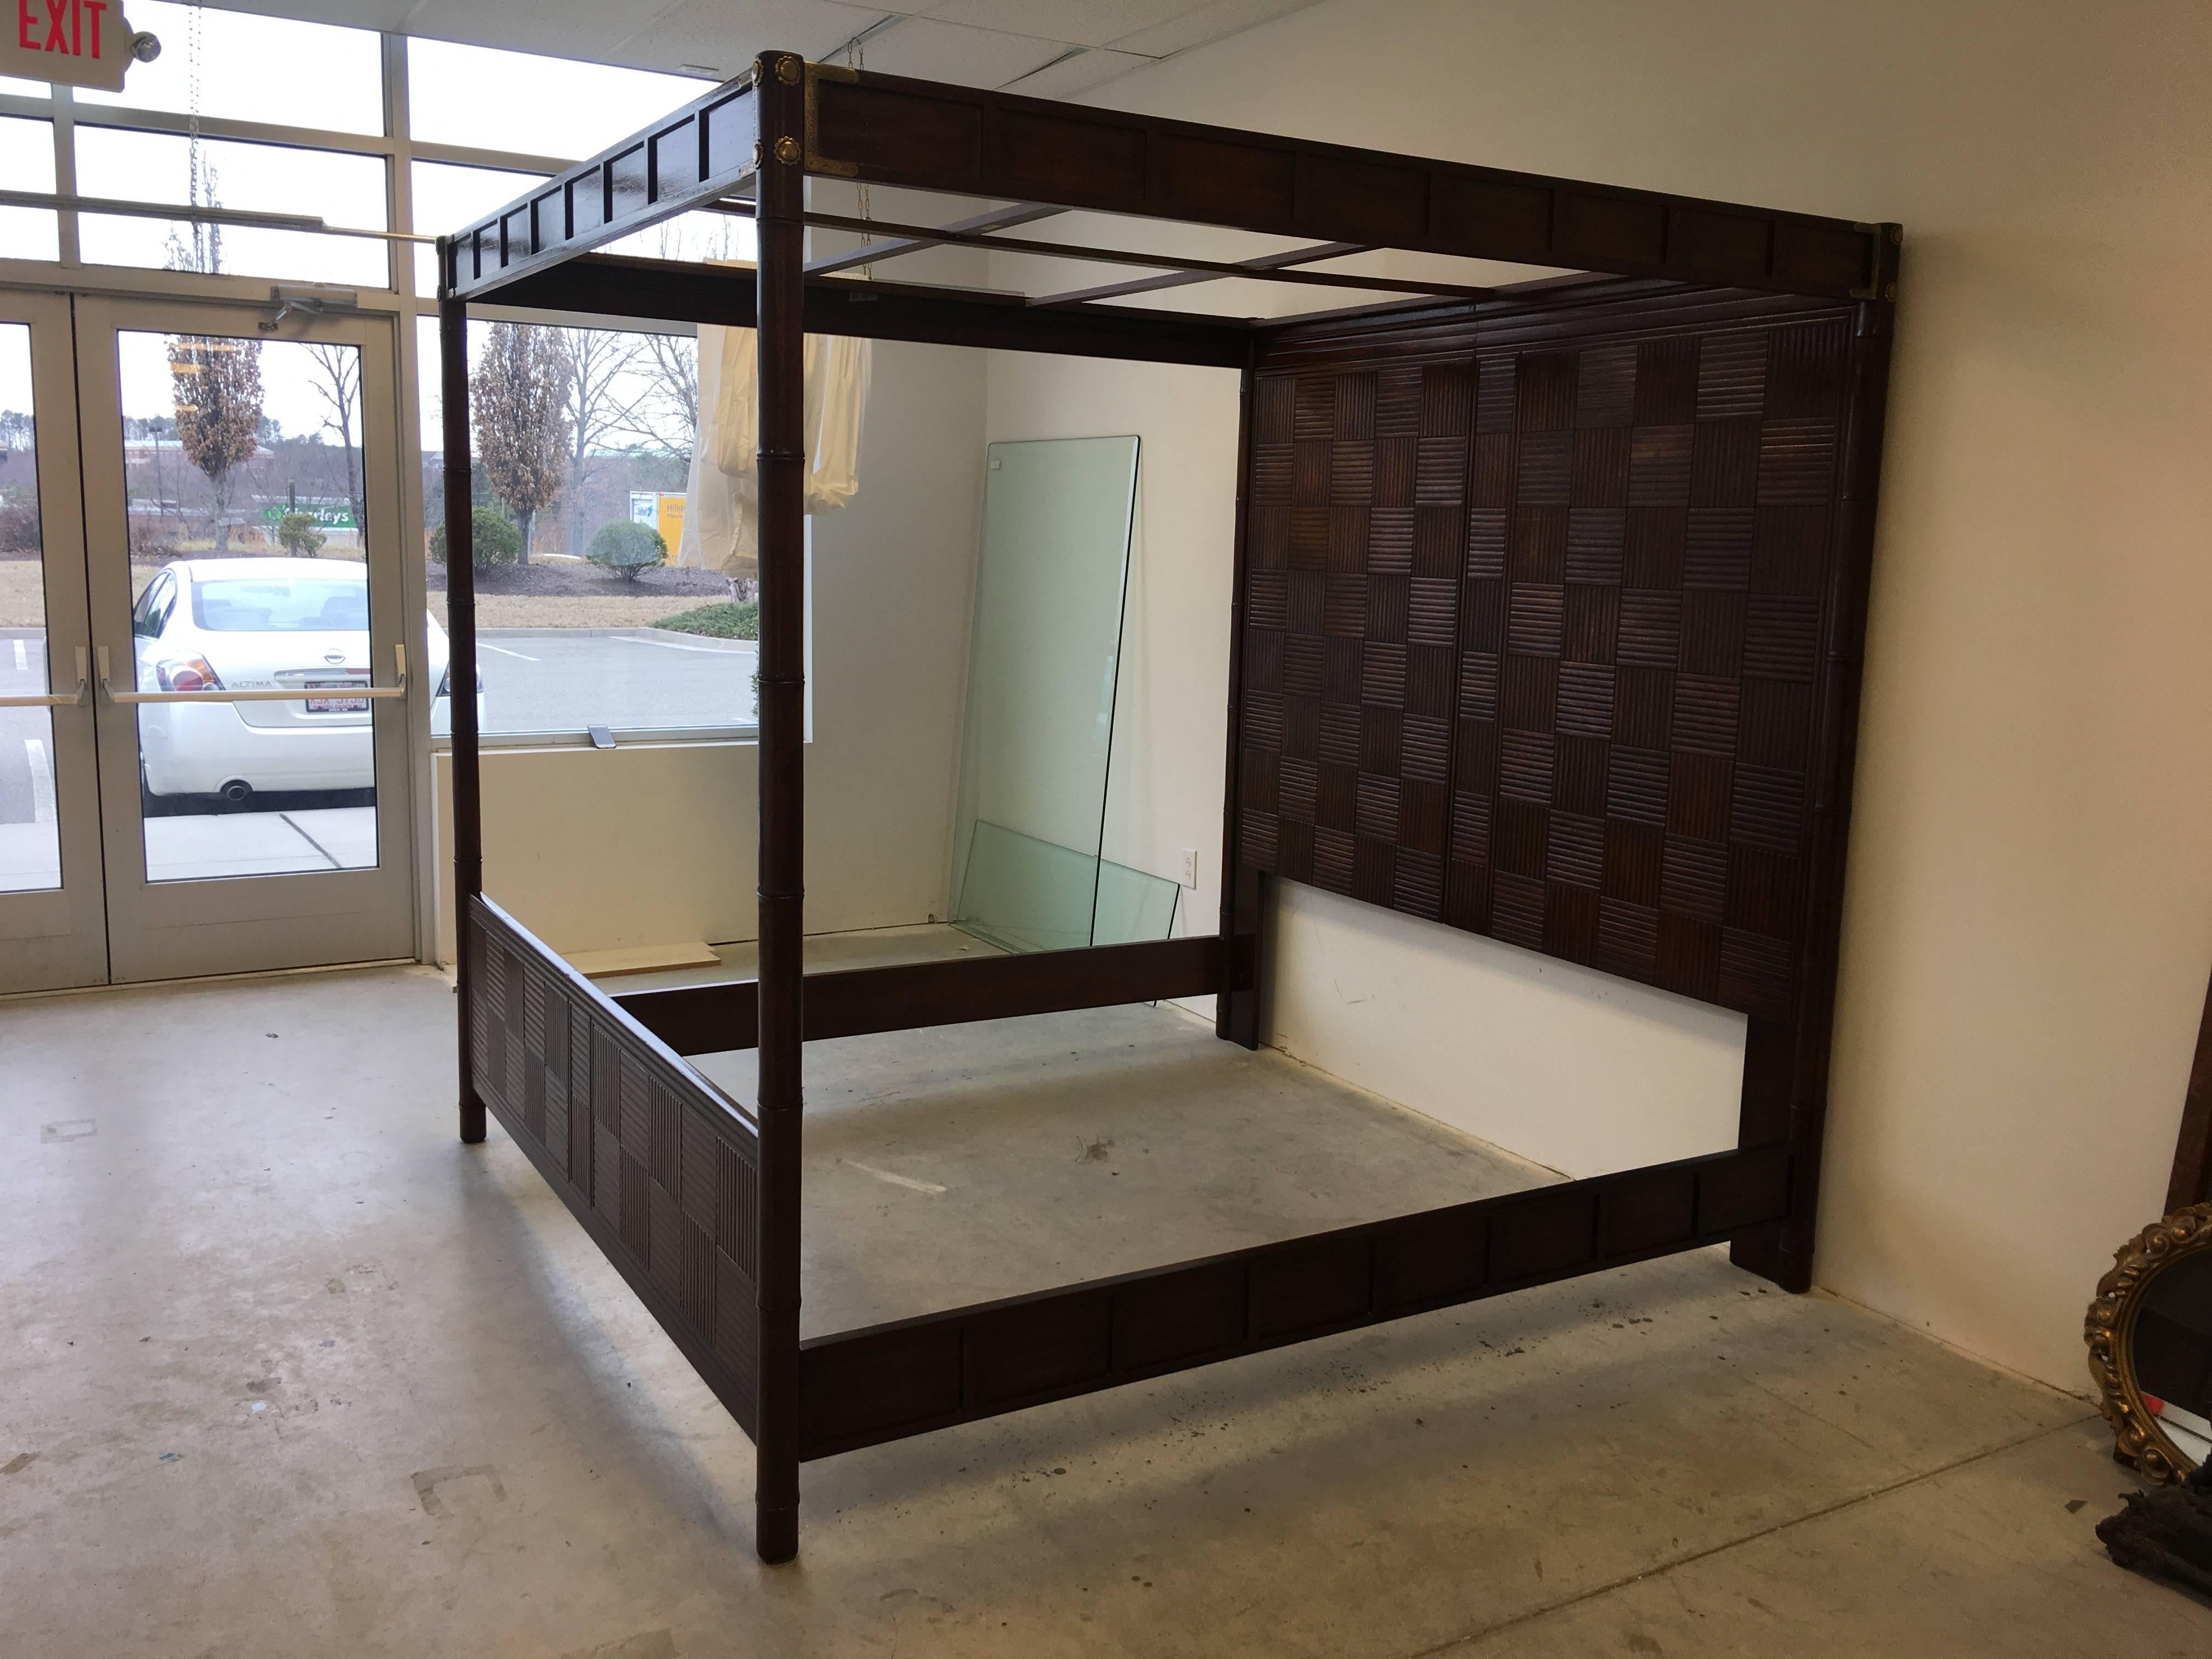 Offered is a stunning, 1970s Henredon Fine Furniture faux bamboo king-size canopy bed, with brass Campaign style accents along the headrails. The piece does not include bed rails/frame. Fits metal bed frame or wood slats.